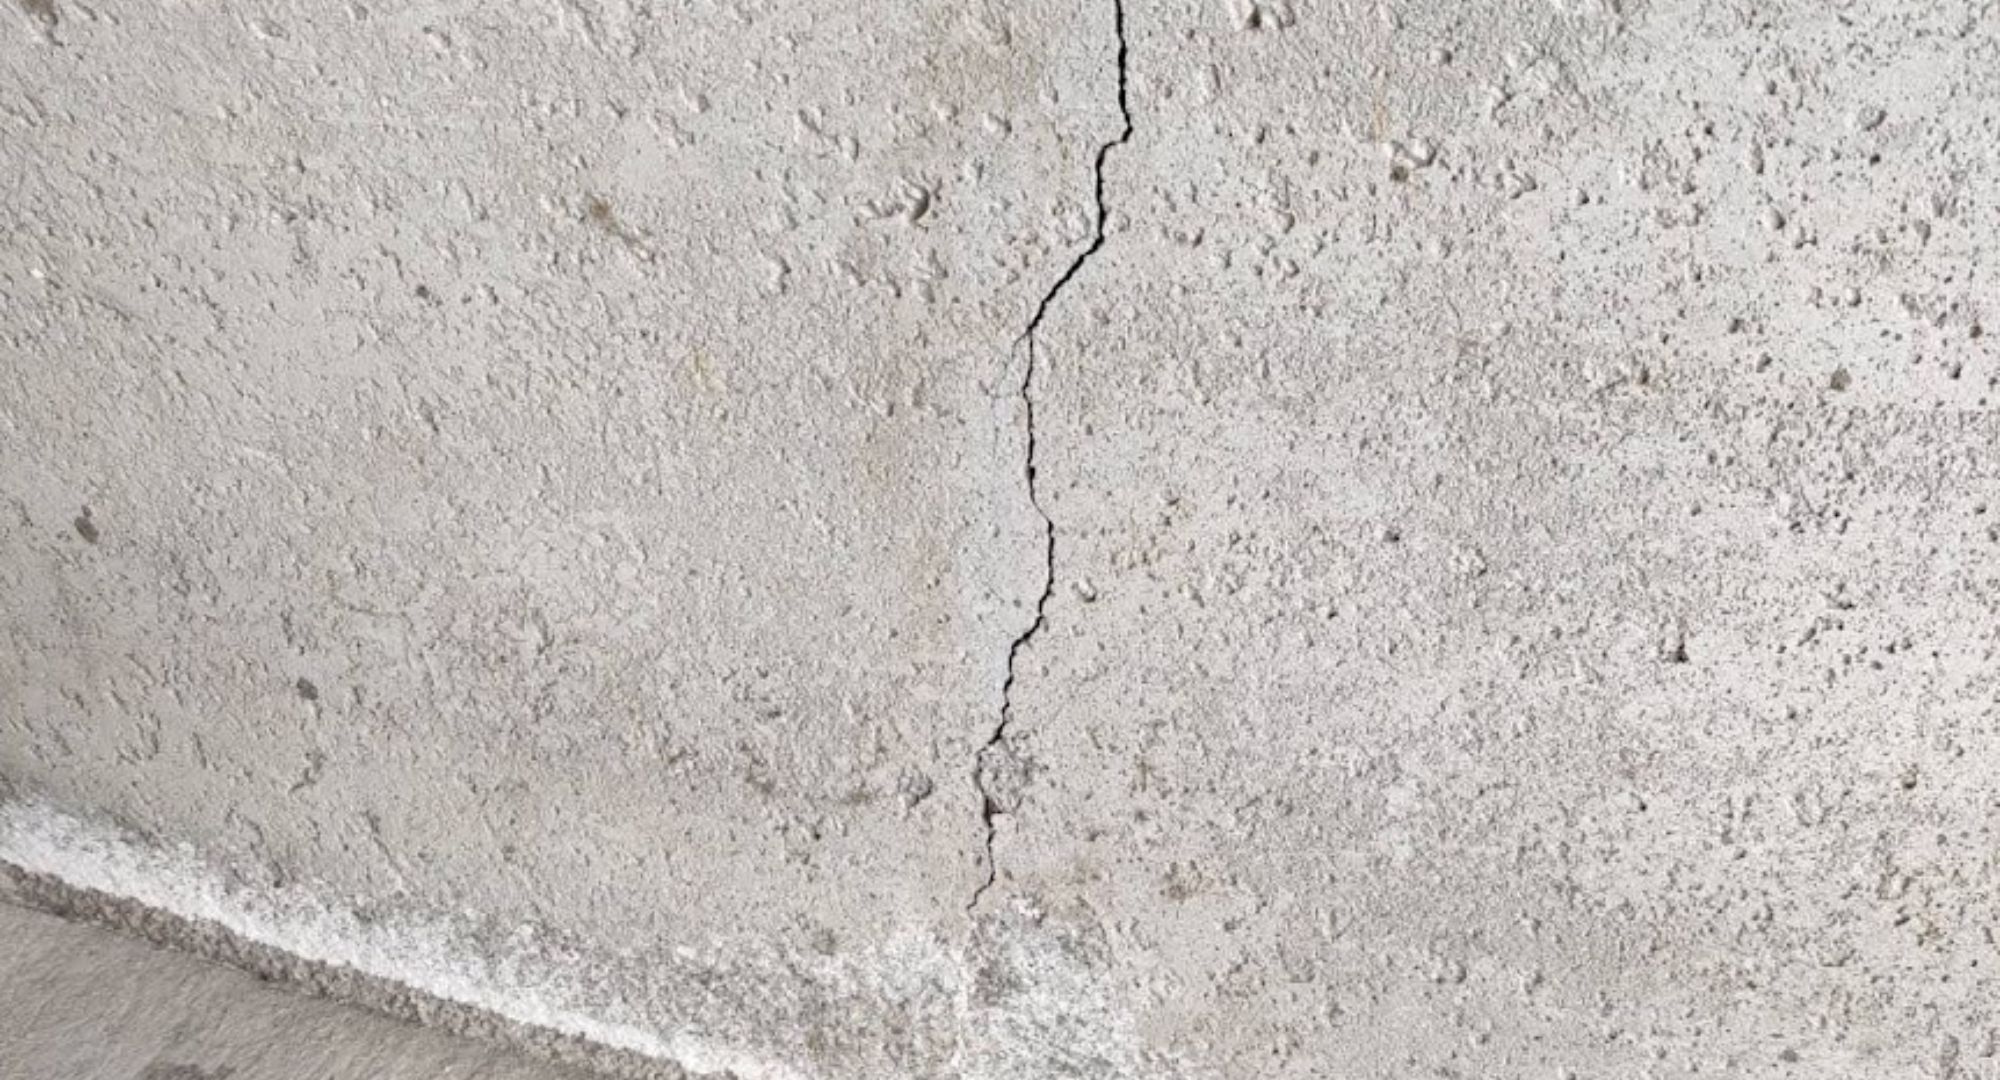 How wide are the cracks?